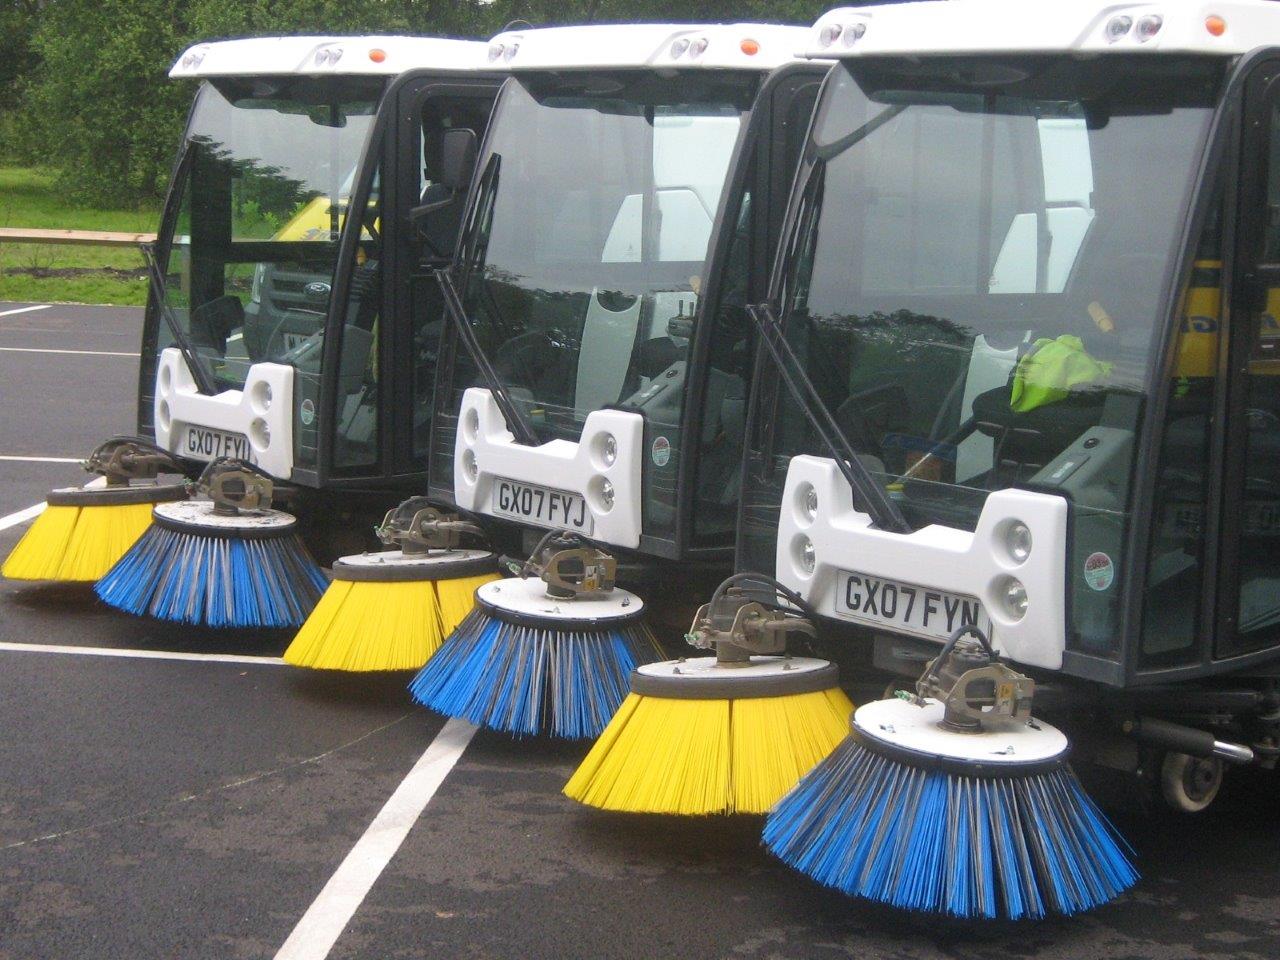 Picture showing three street cleansing vehicles